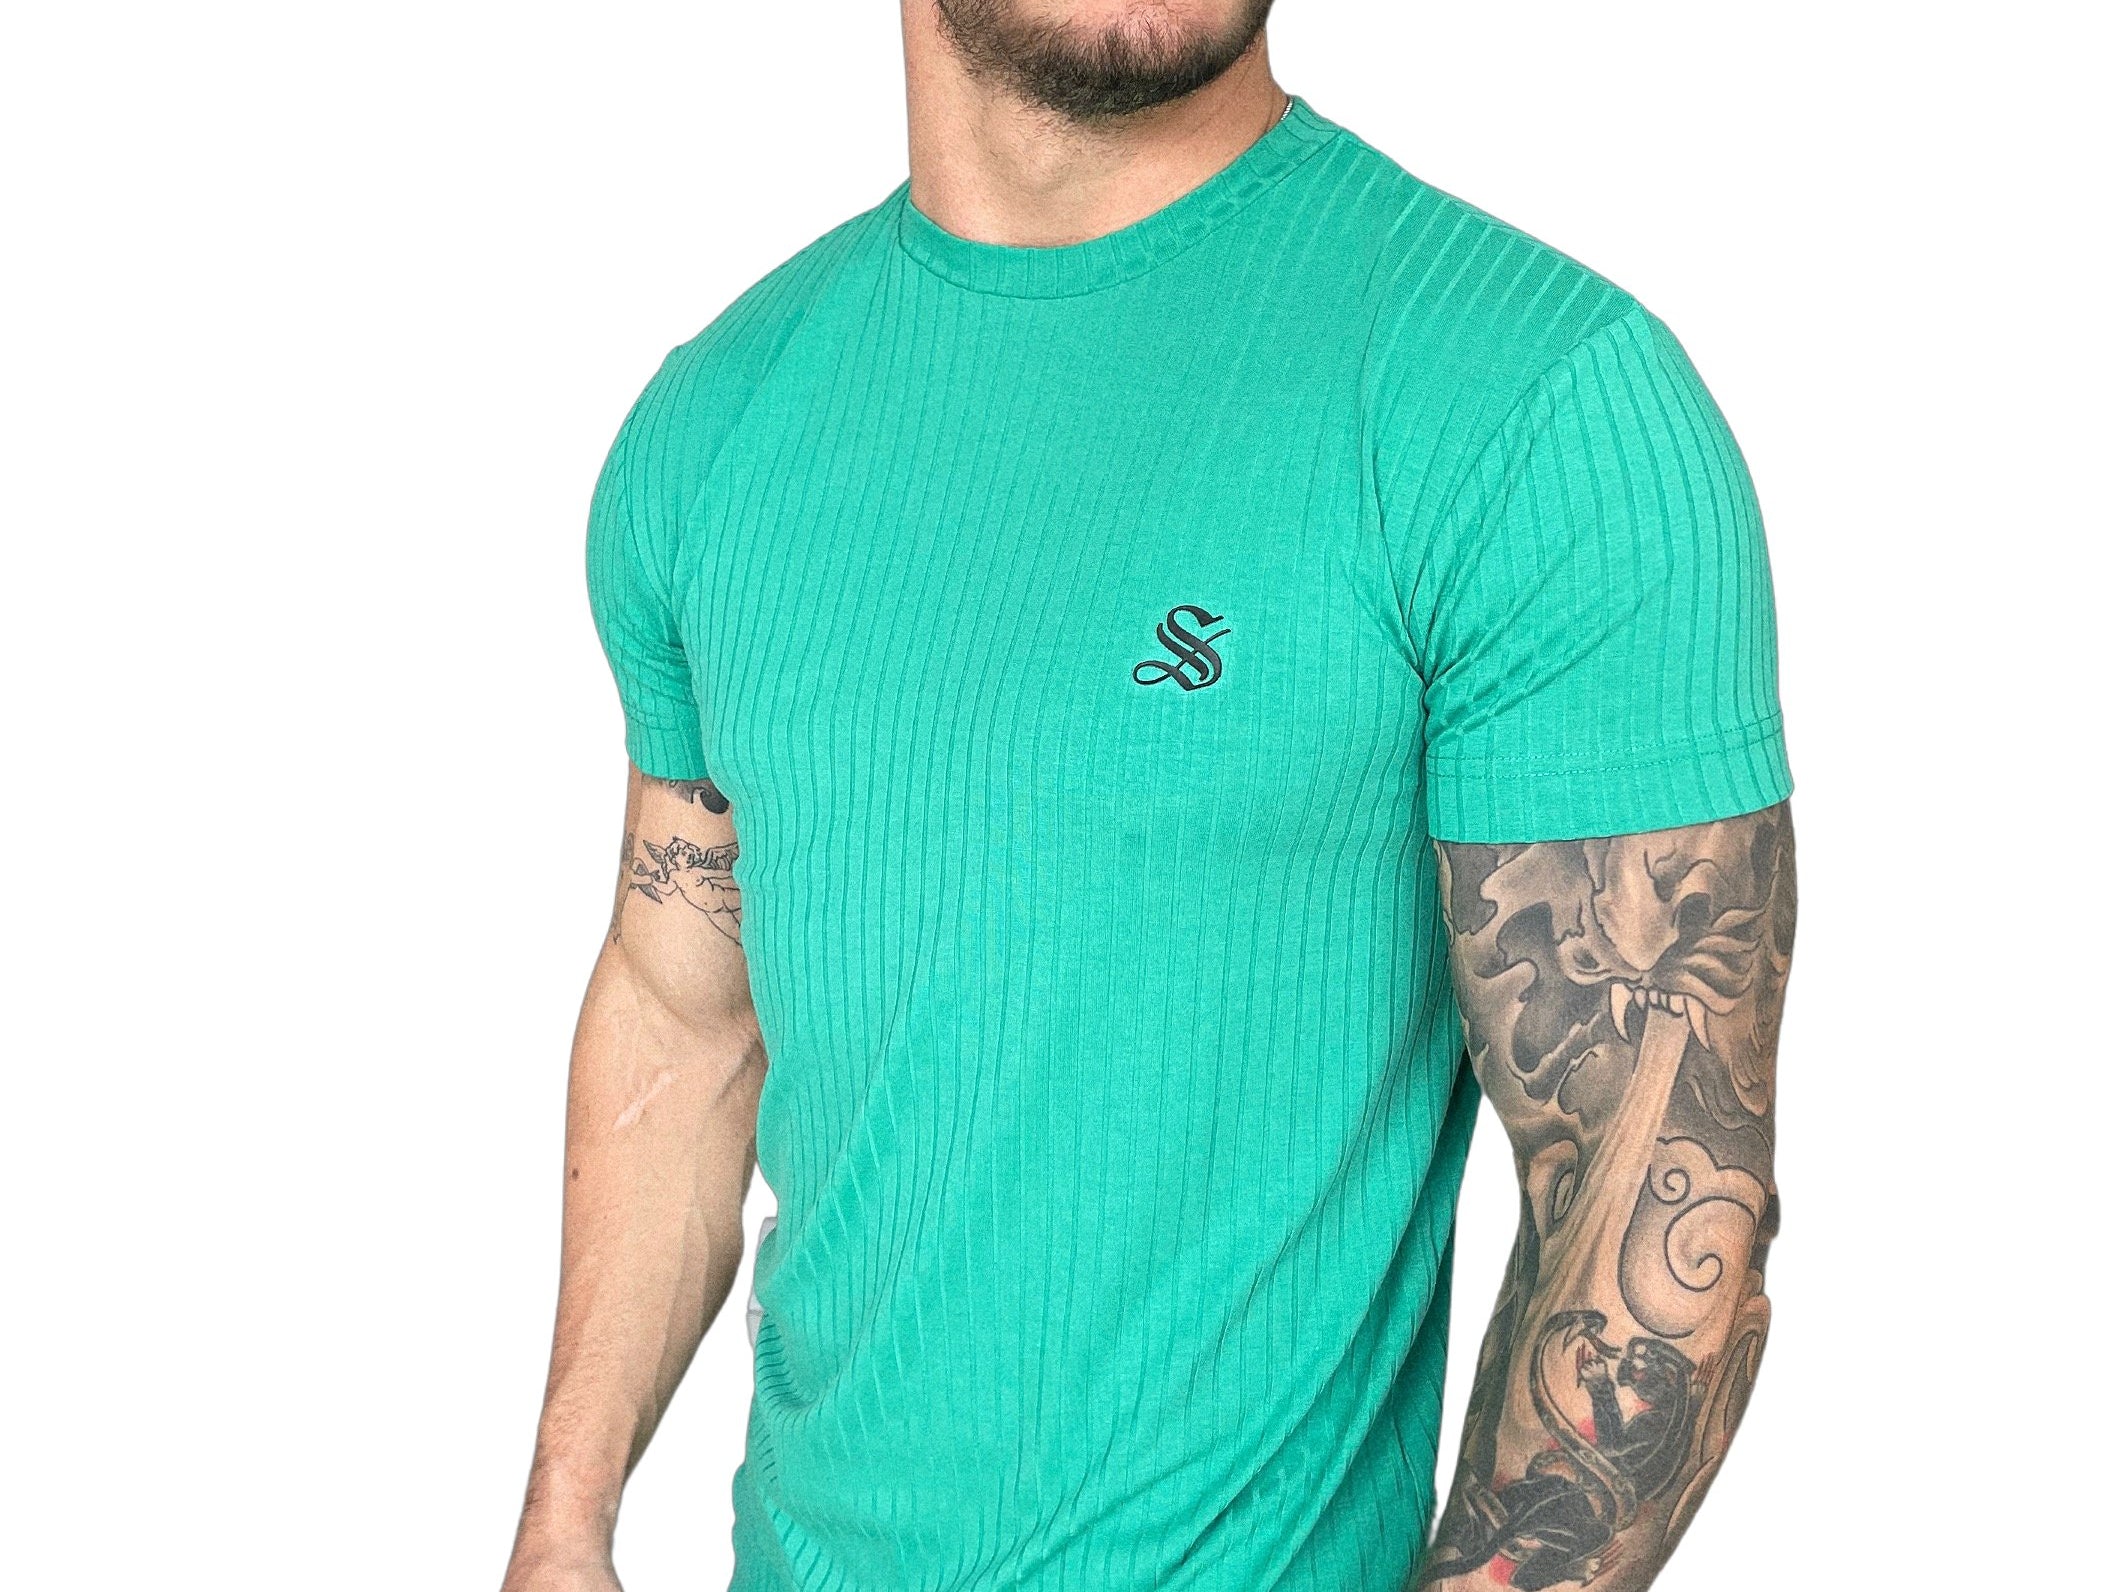 Renesmee - T-shirt for Men - Sarman Fashion - Wholesale Clothing Fashion Brand for Men from Canada